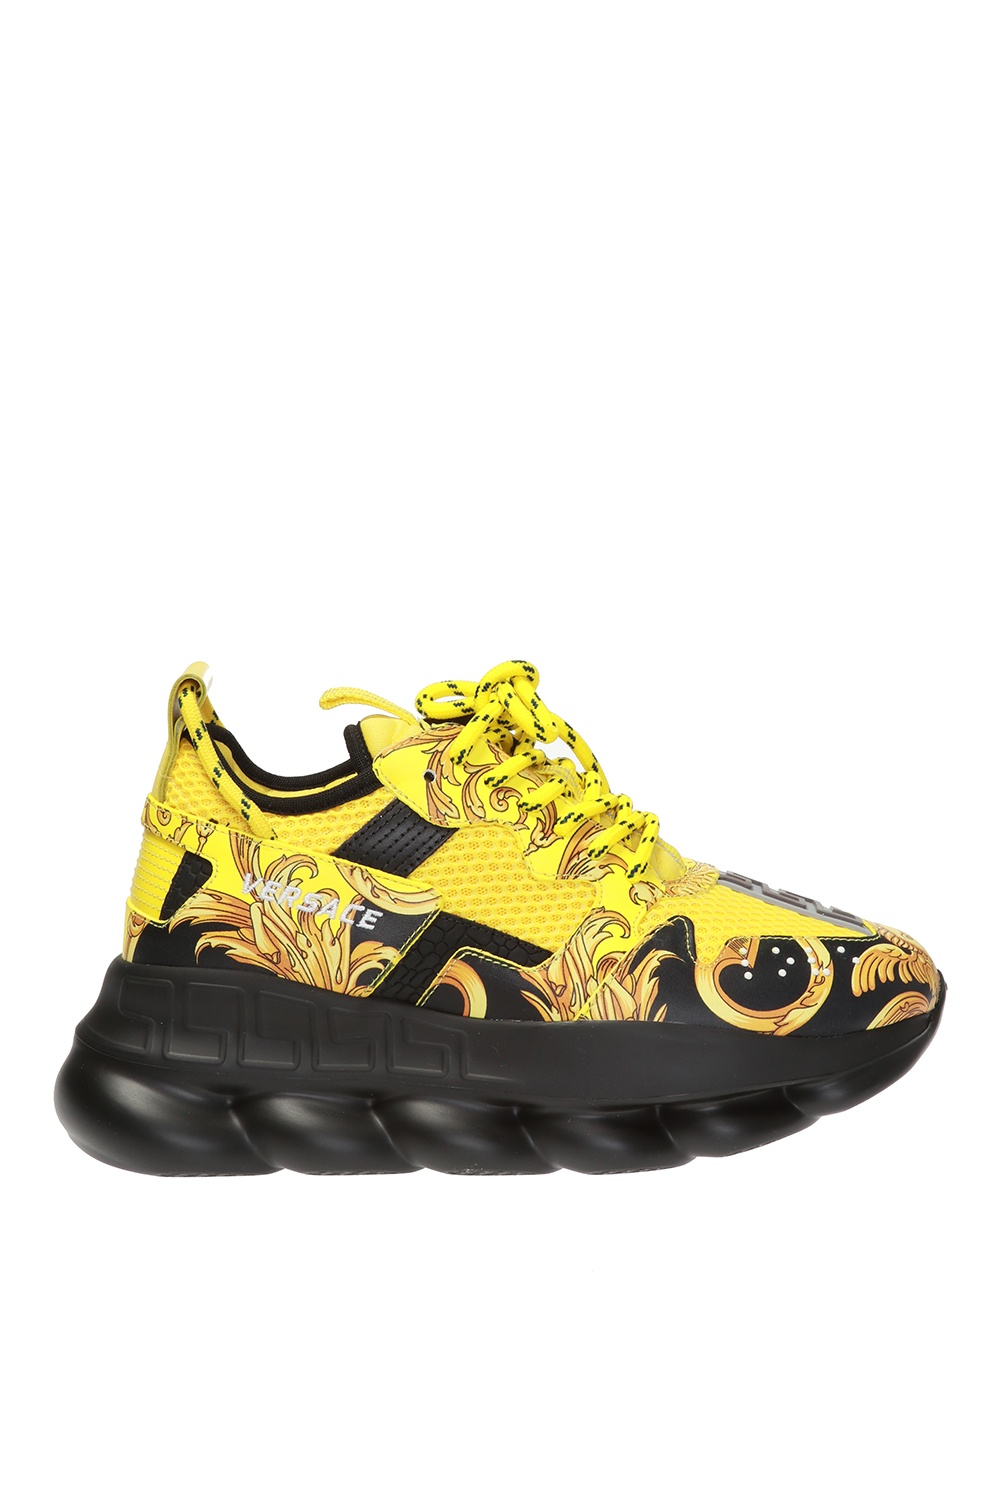 yellow versace shoes